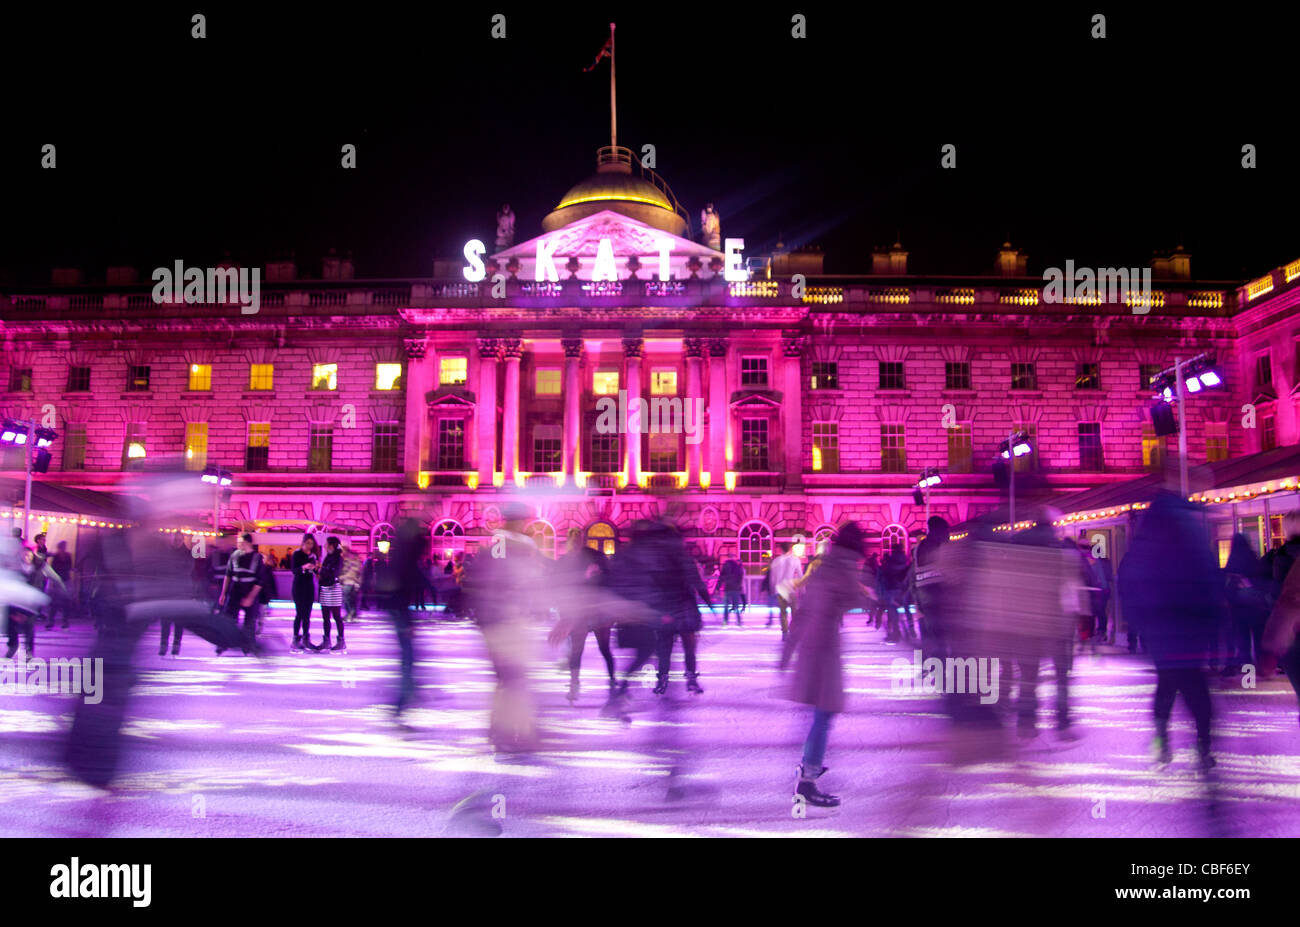 Somerset House Christmas ice rink with people skating at night December 2011 The Strand London England UK Stock Photo